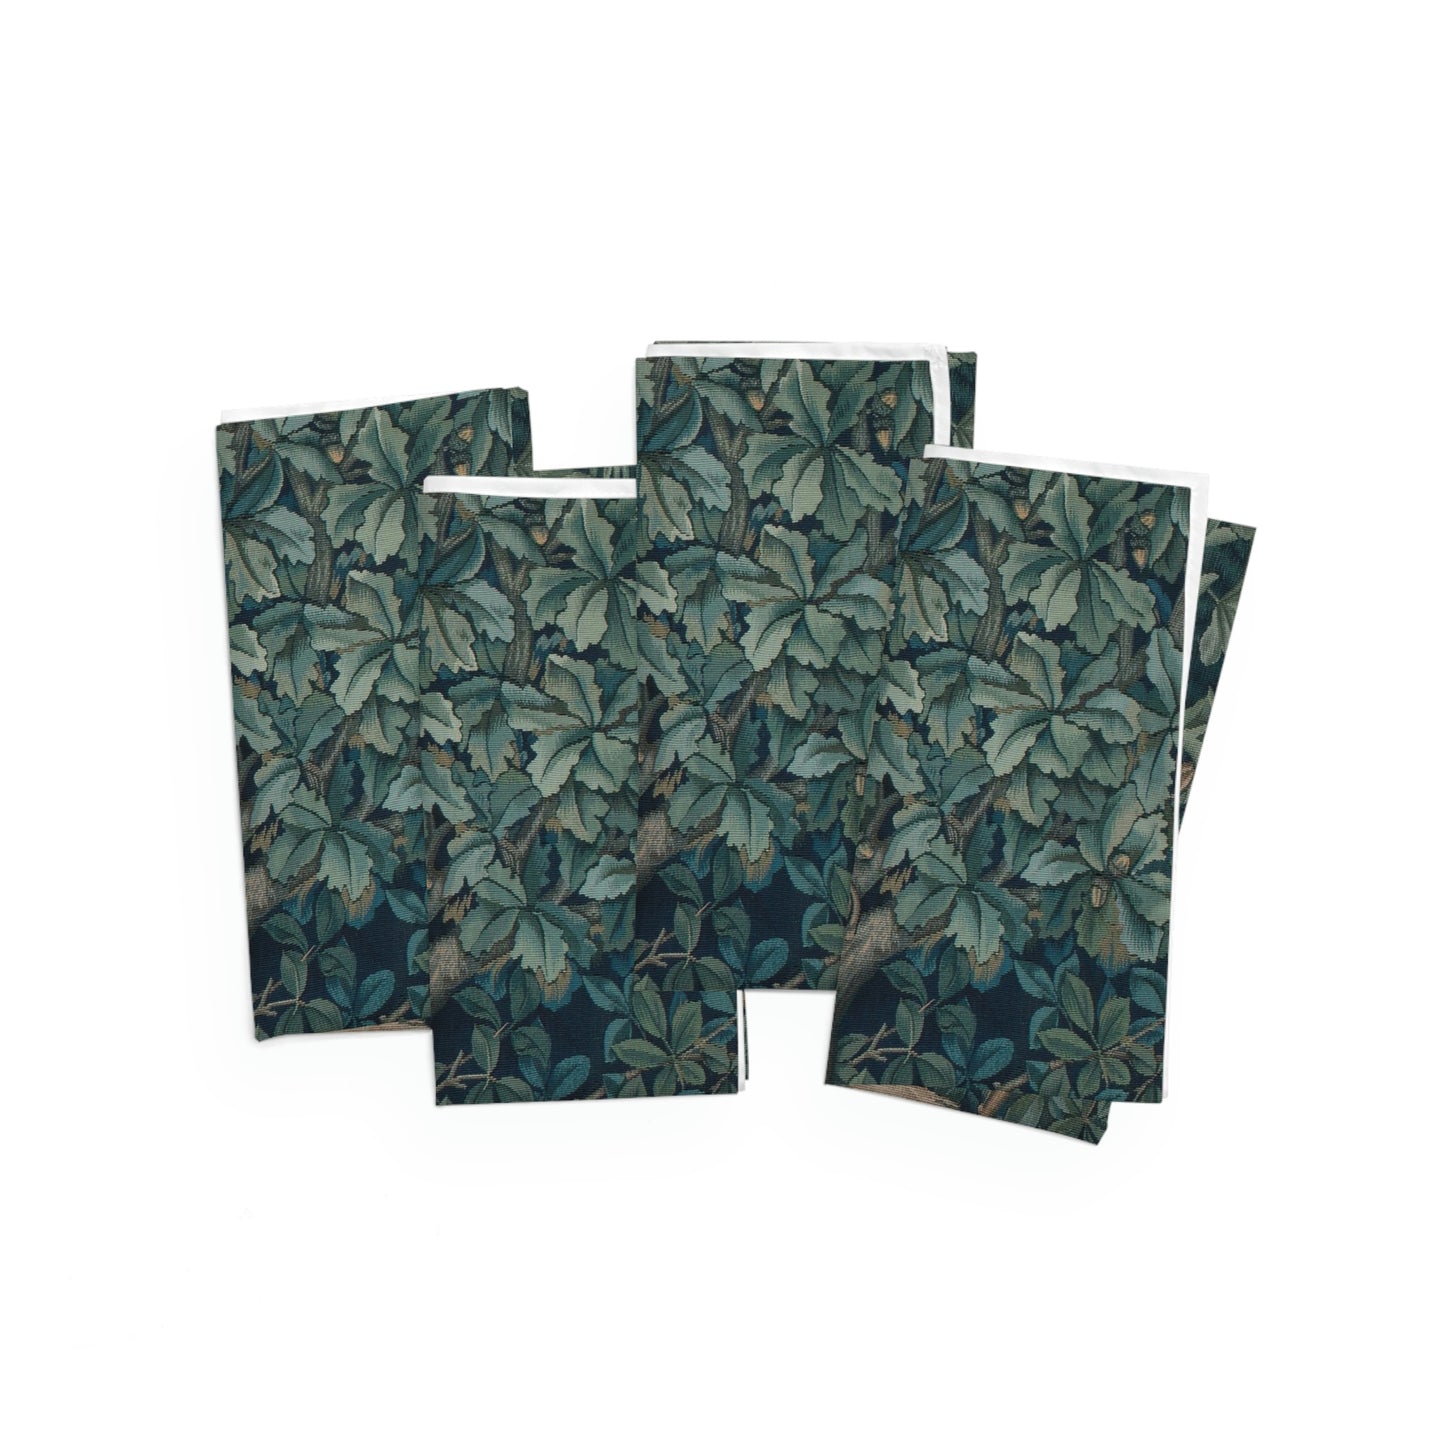 William-Morris-&-Co-Table-Napkins-Dear-by-John-Henry-Dearle-Green-Forest-Collection-3william-morris-co-table-napkins-greenery-collection-dear-3